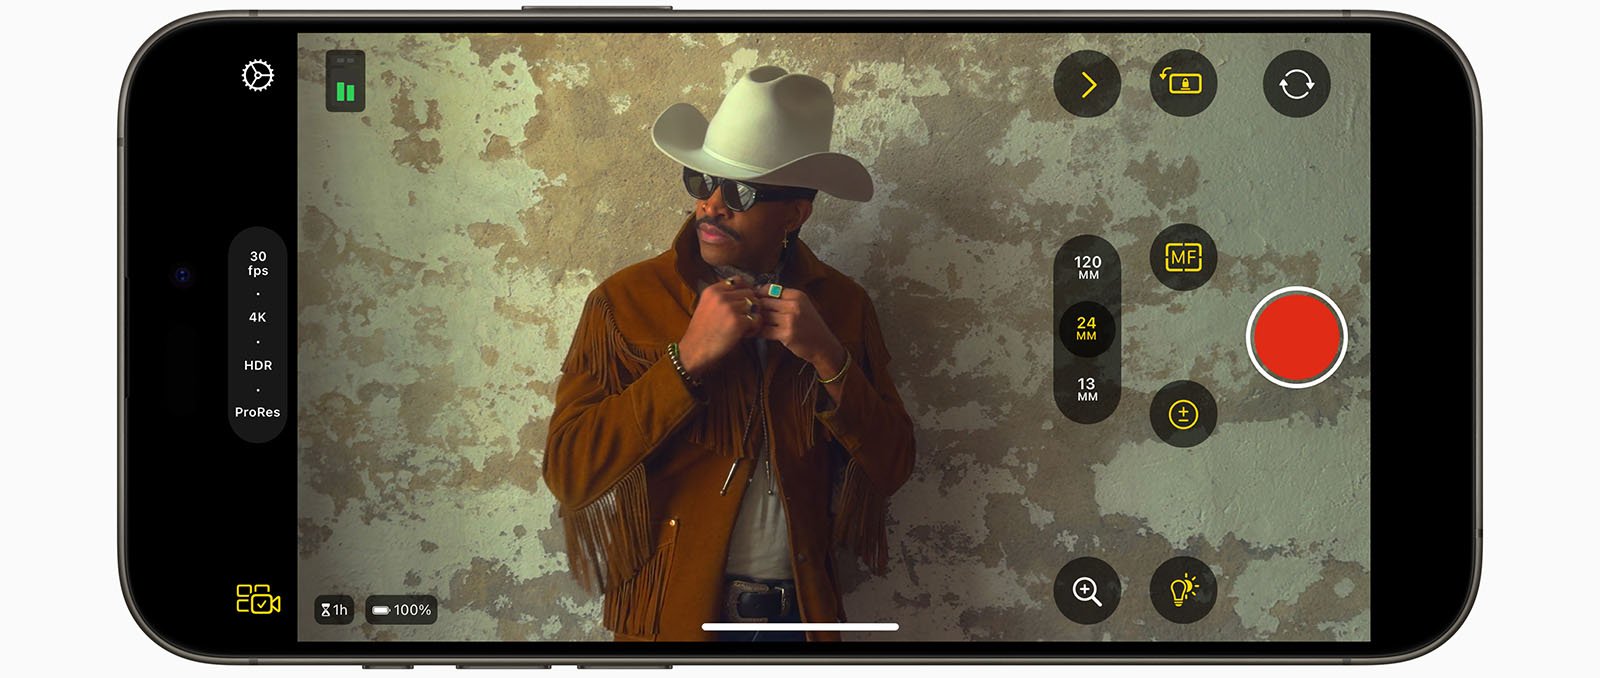 A smartphone screen displays a camera interface focused on a stylish man wearing a cowboy hat and leather jacket, lighting a cigarette. various camera settings are visible on the screen.